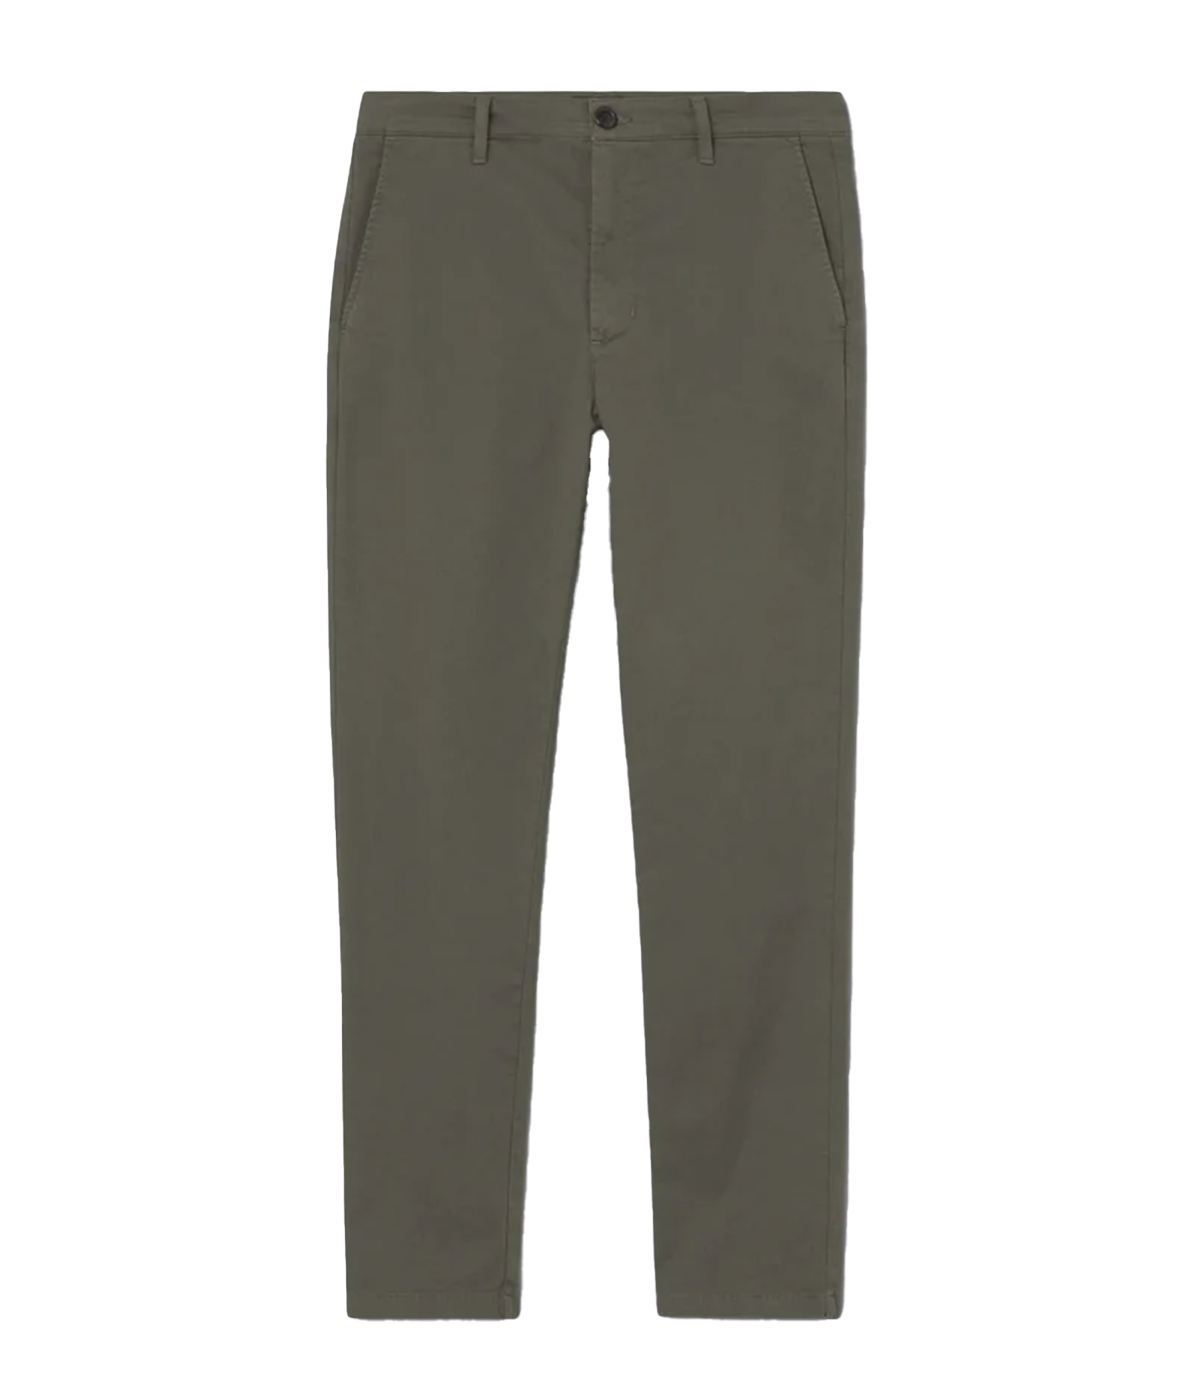 London Chino Twill in Toasted Matcha